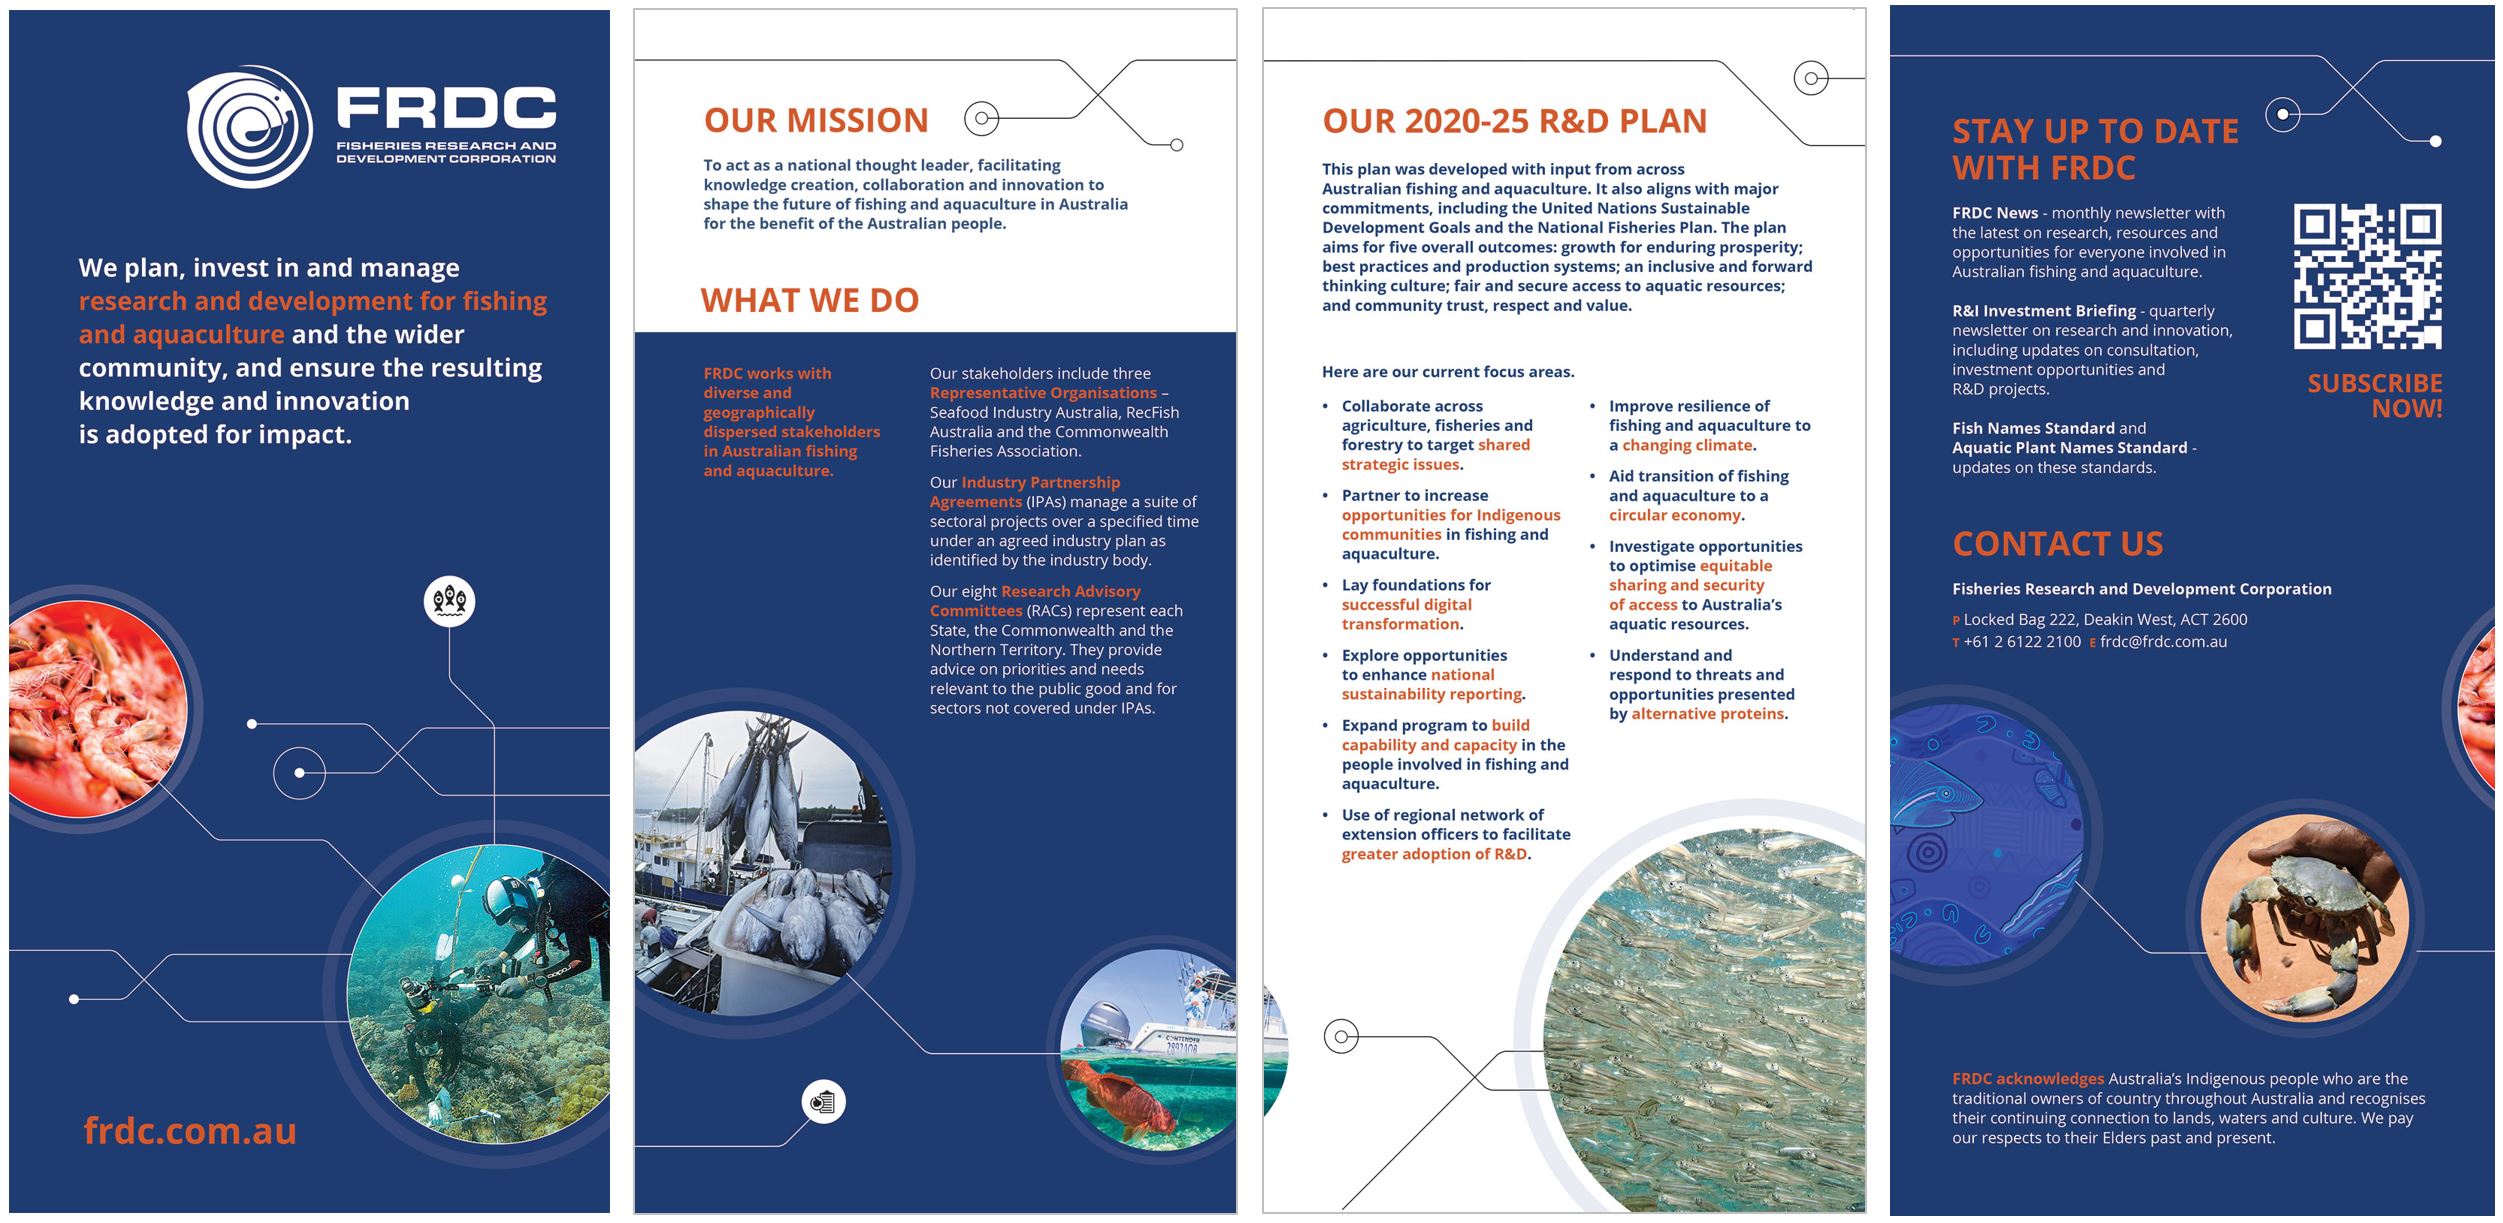 FRDC brochure explaining who we are, our mission, what we do and our R&D Plan